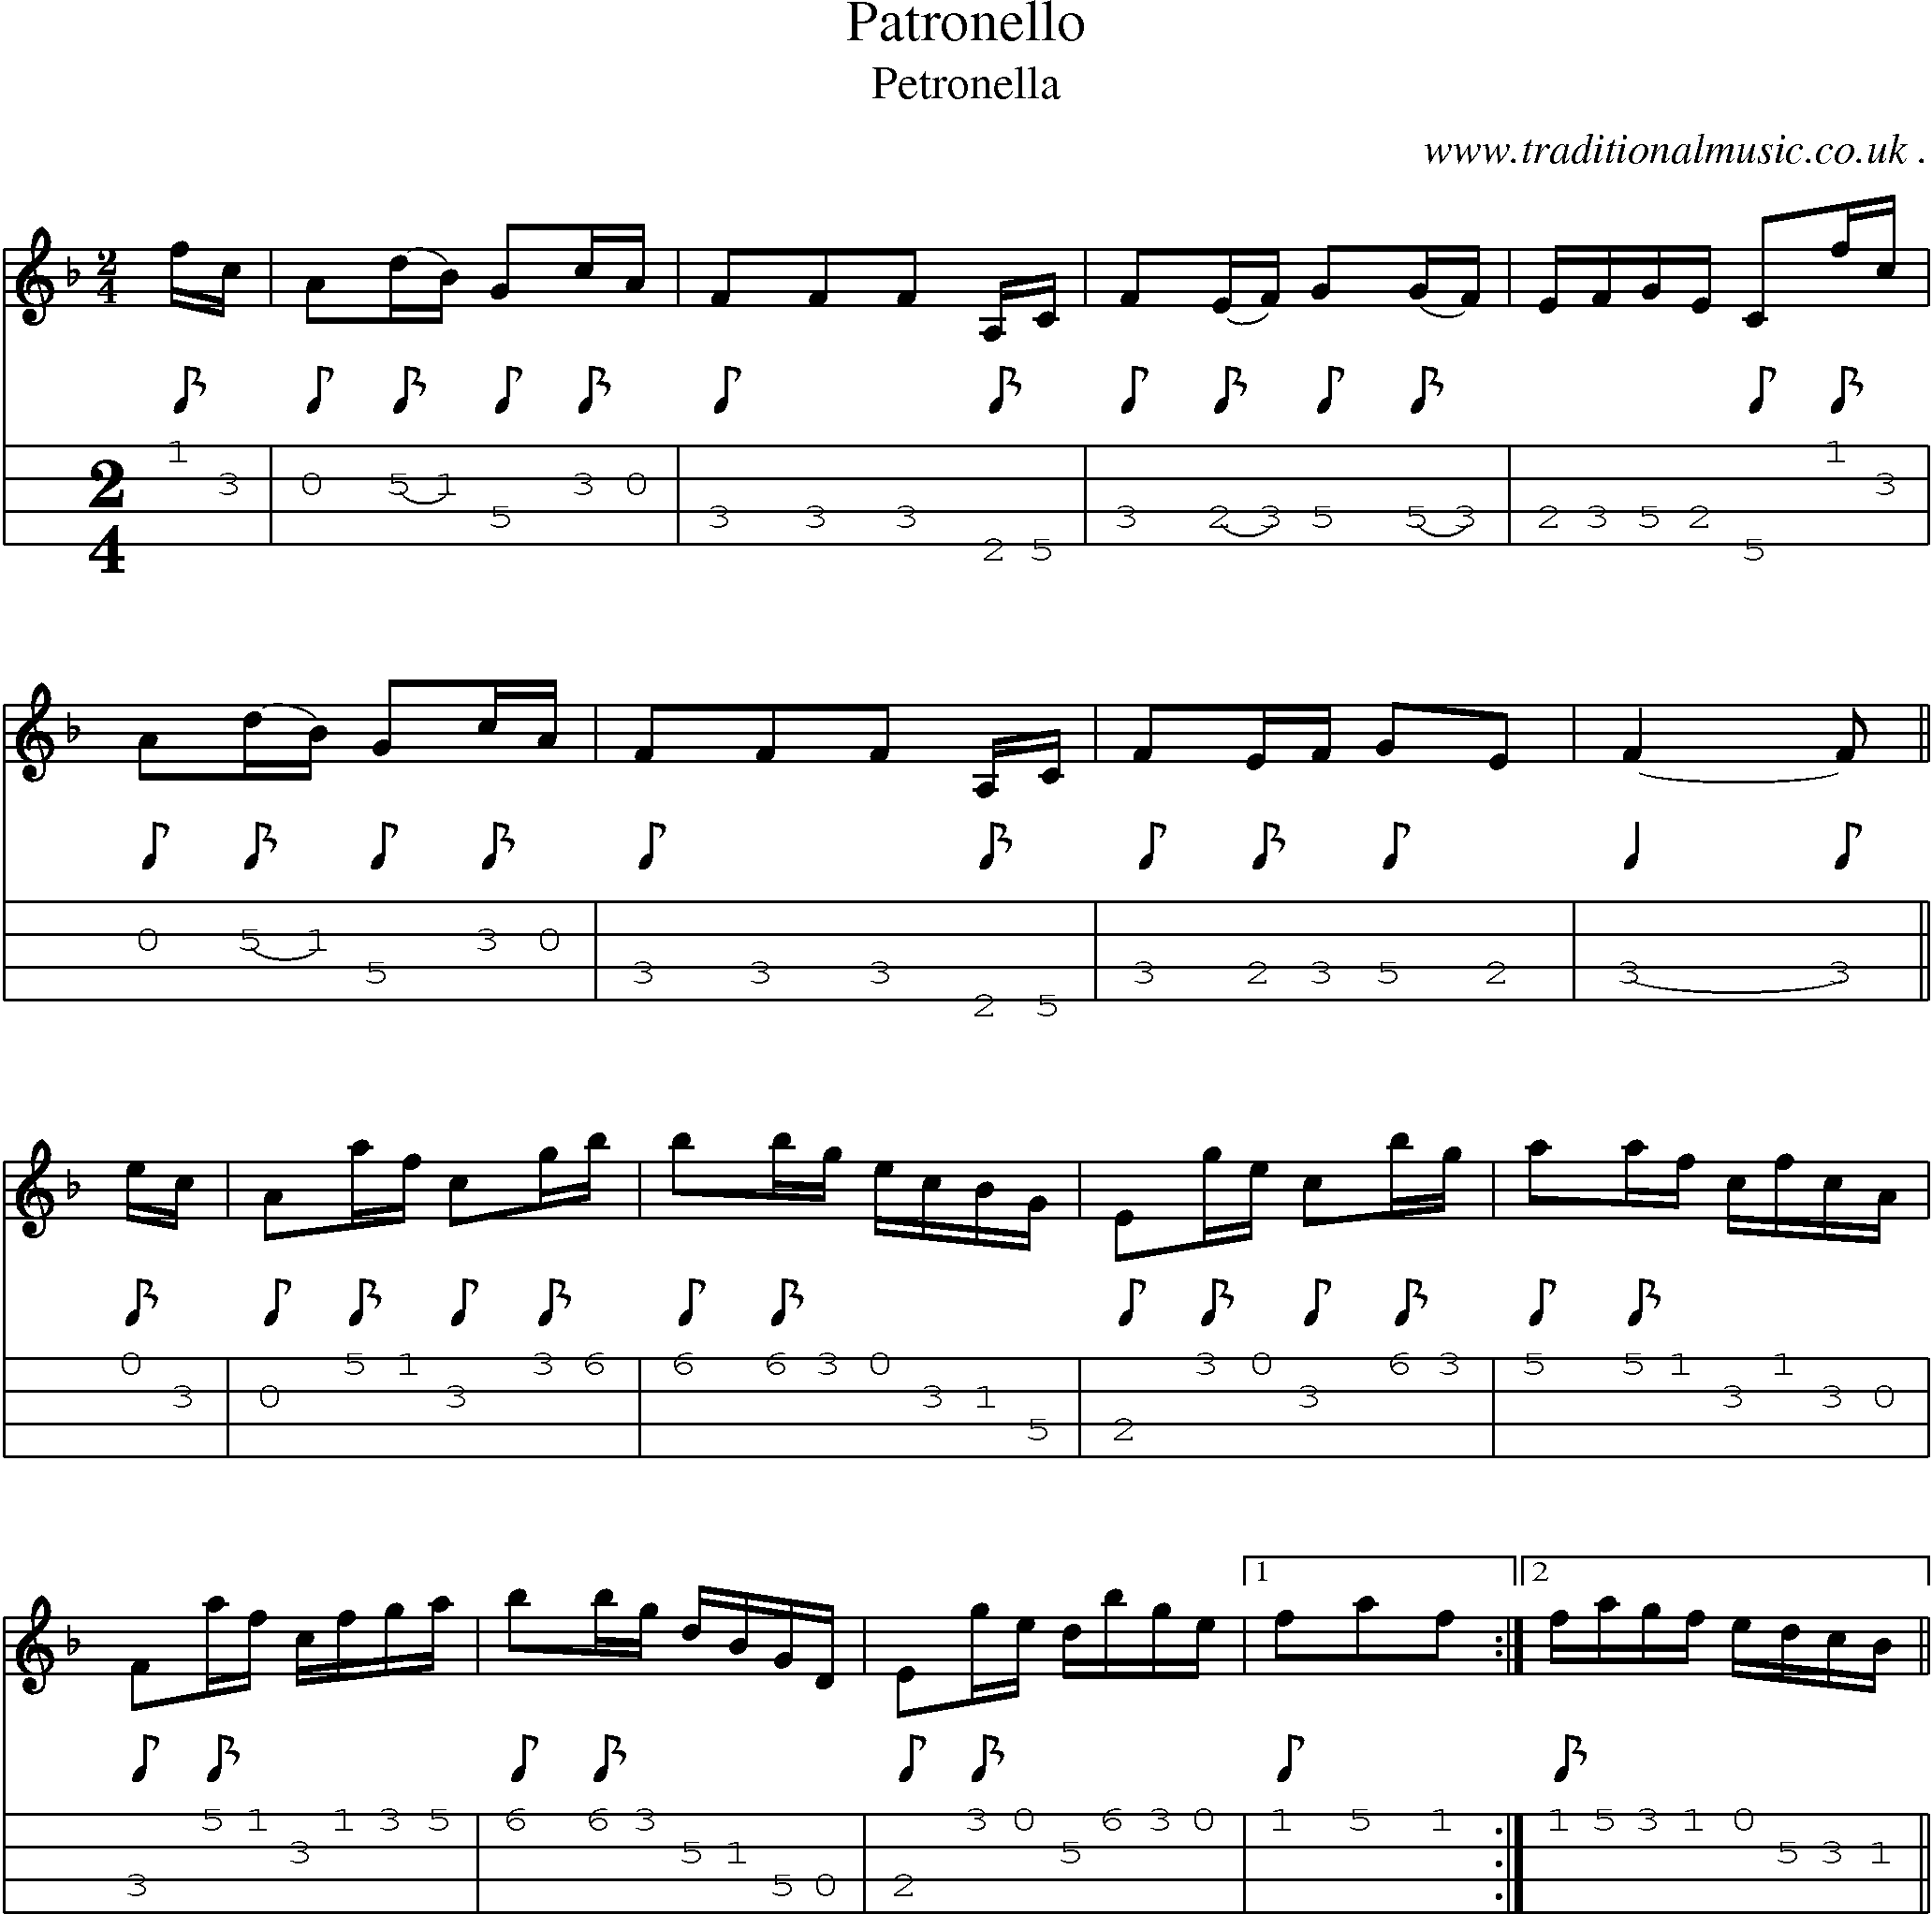 Sheet-Music and Mandolin Tabs for Patronello